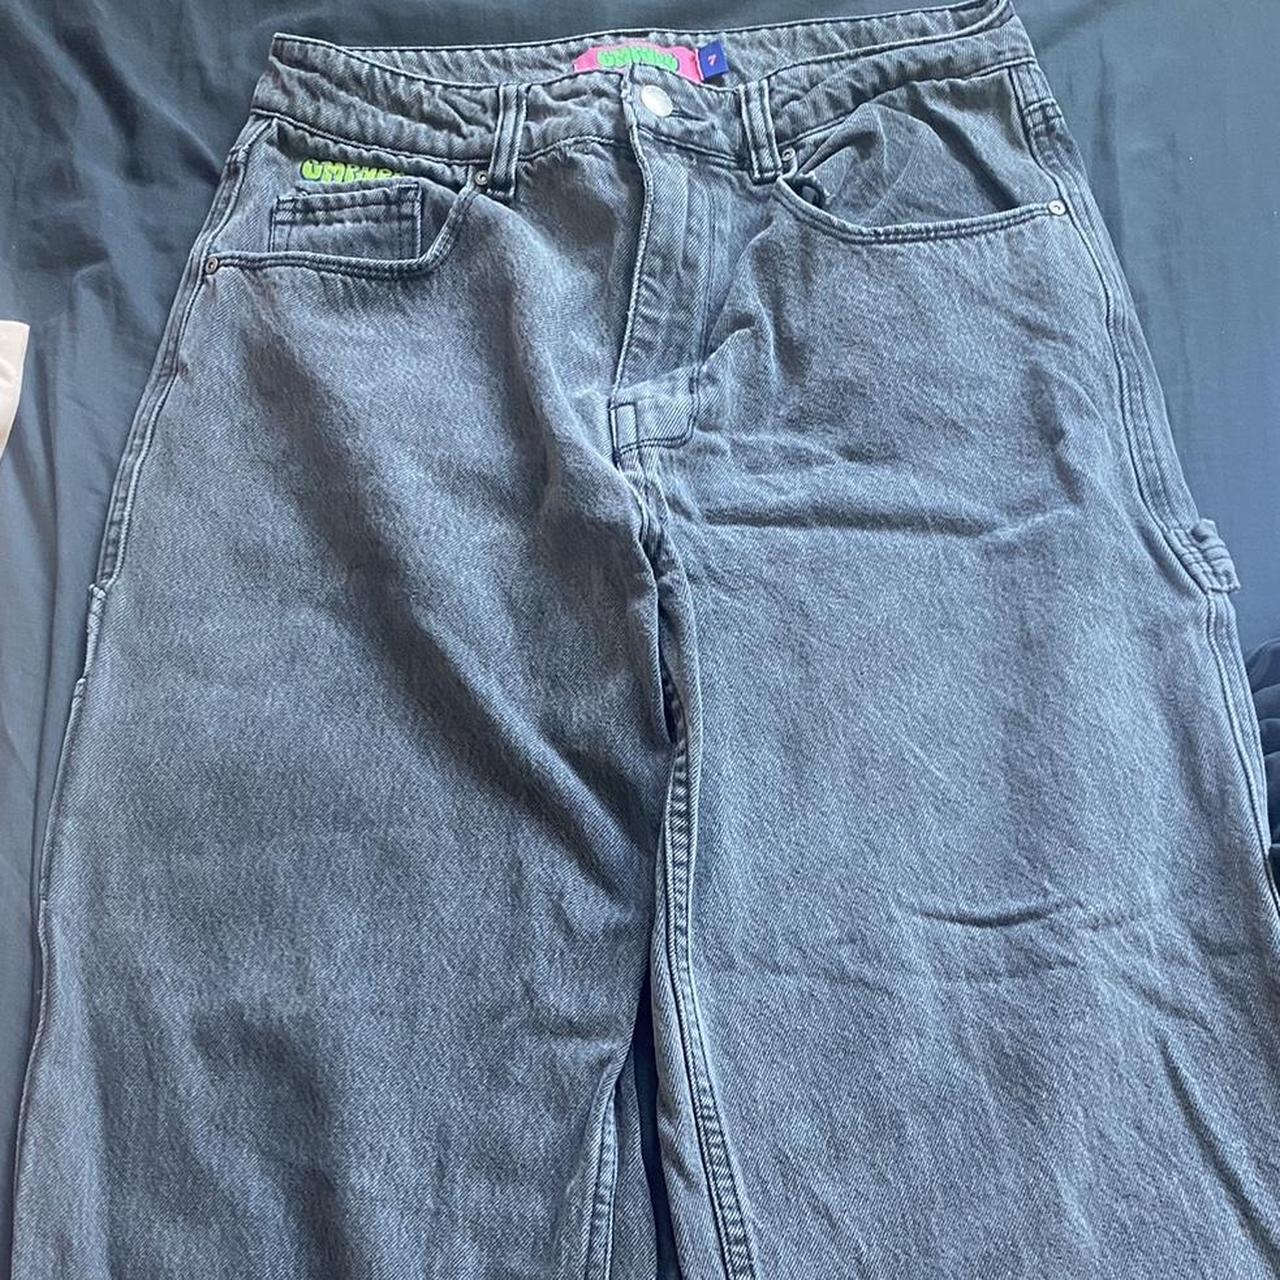 Empire jeans ! Size 7 dm before buying Almost new - Depop